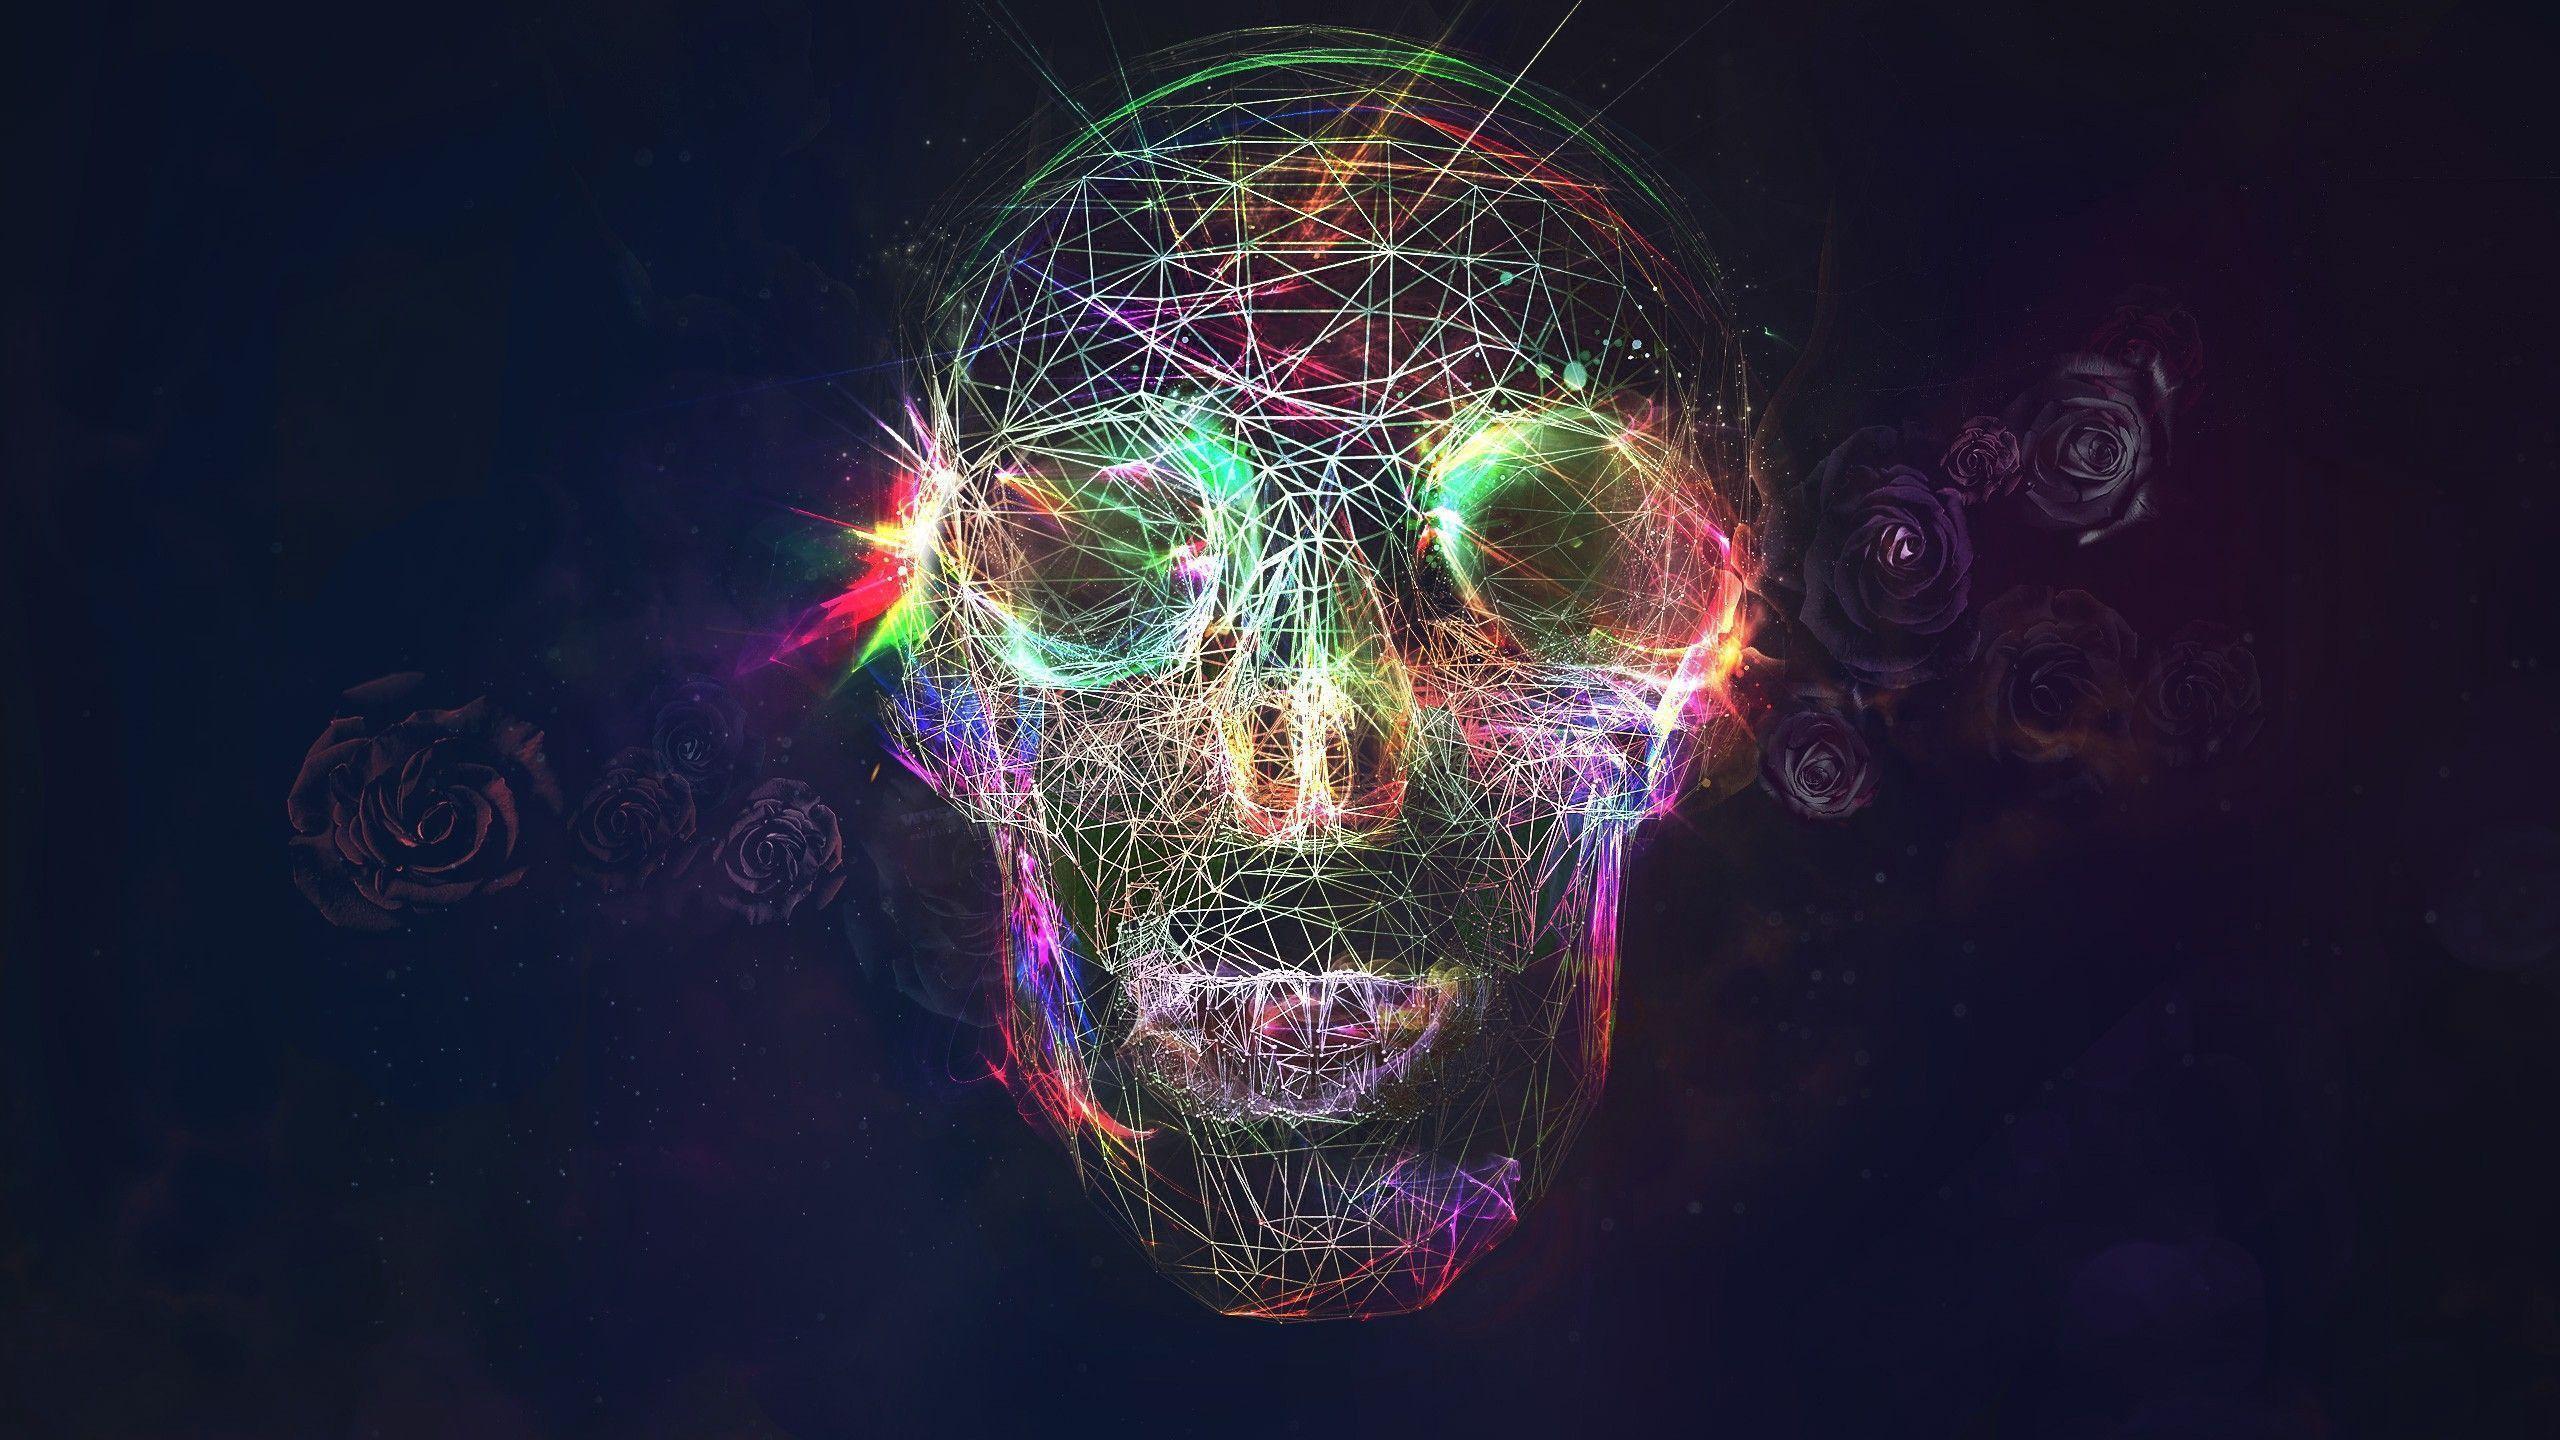 Abstract skull wallpaper and image, picture, photo